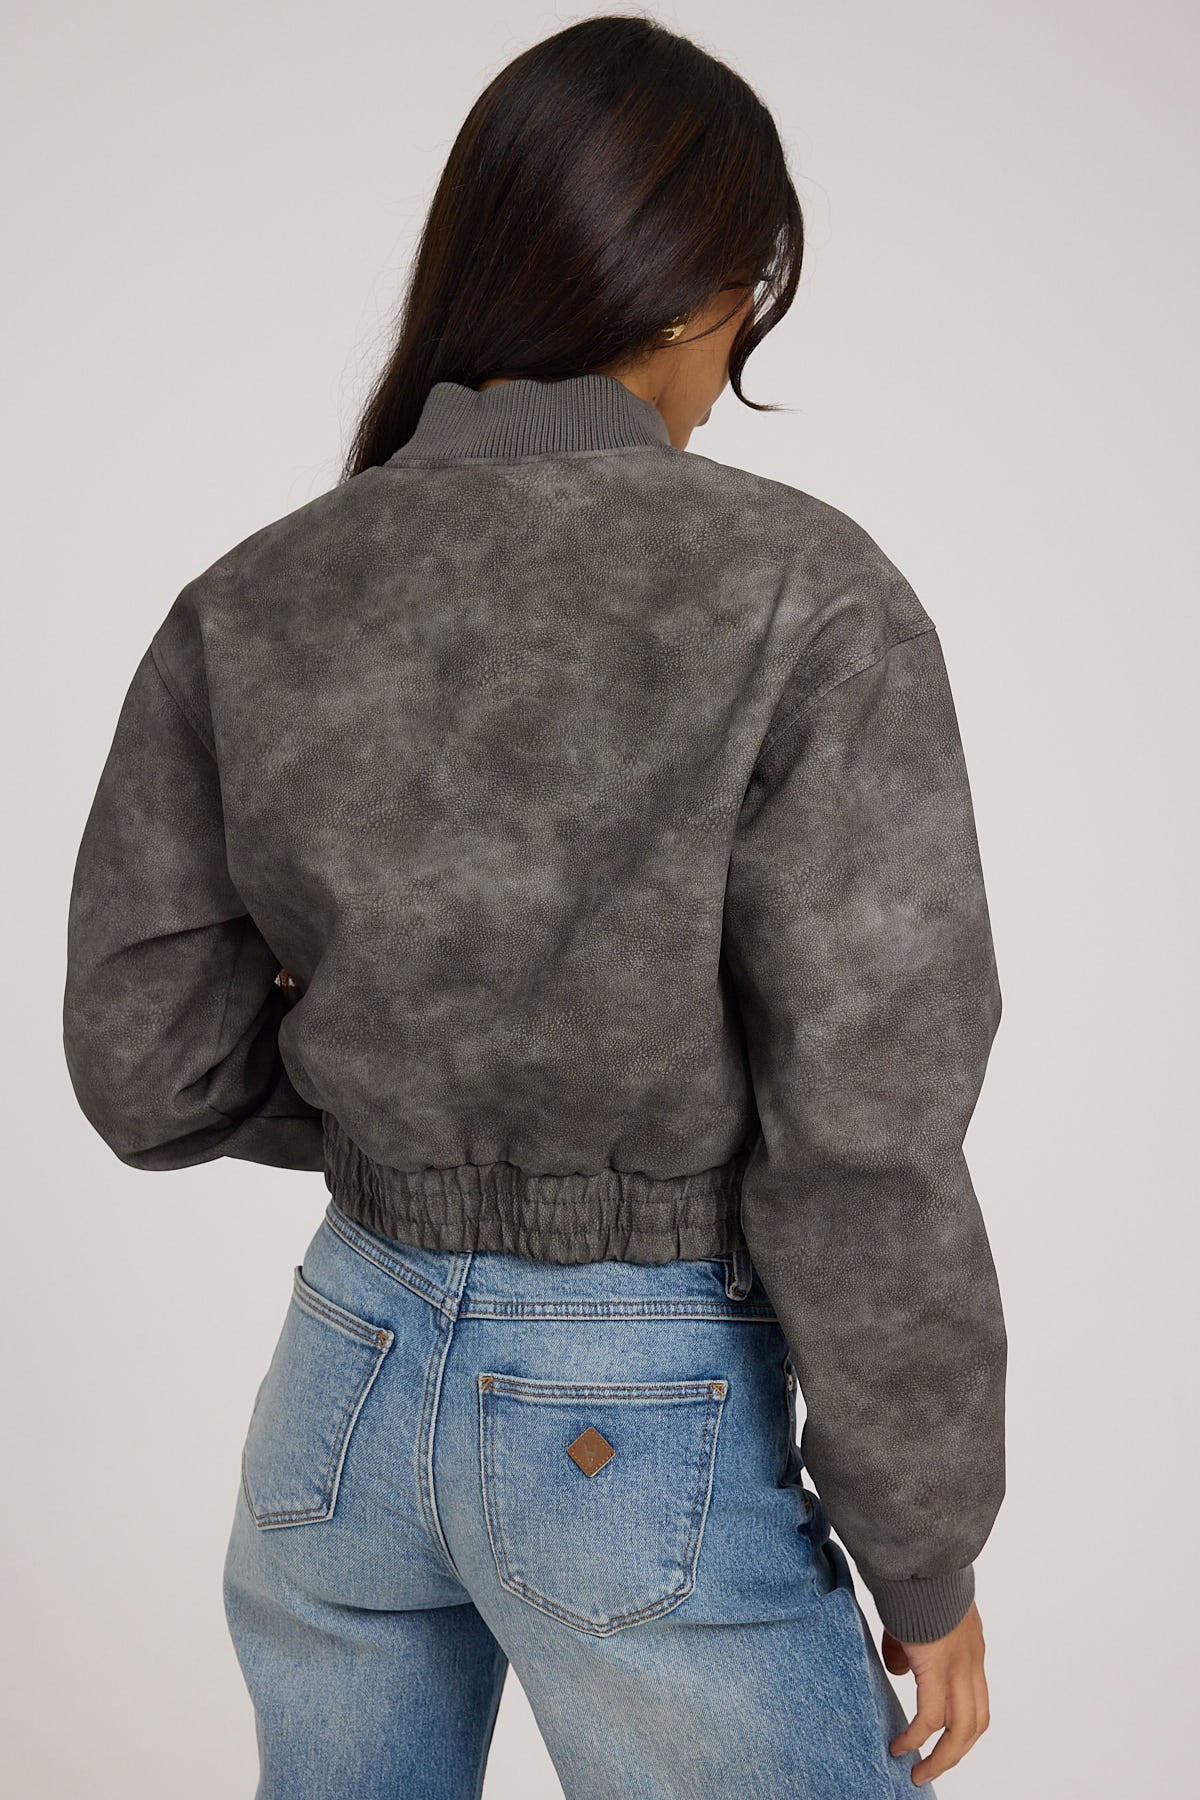 Luck & Trouble Cosmos Distressed Bomber Jacket Grey